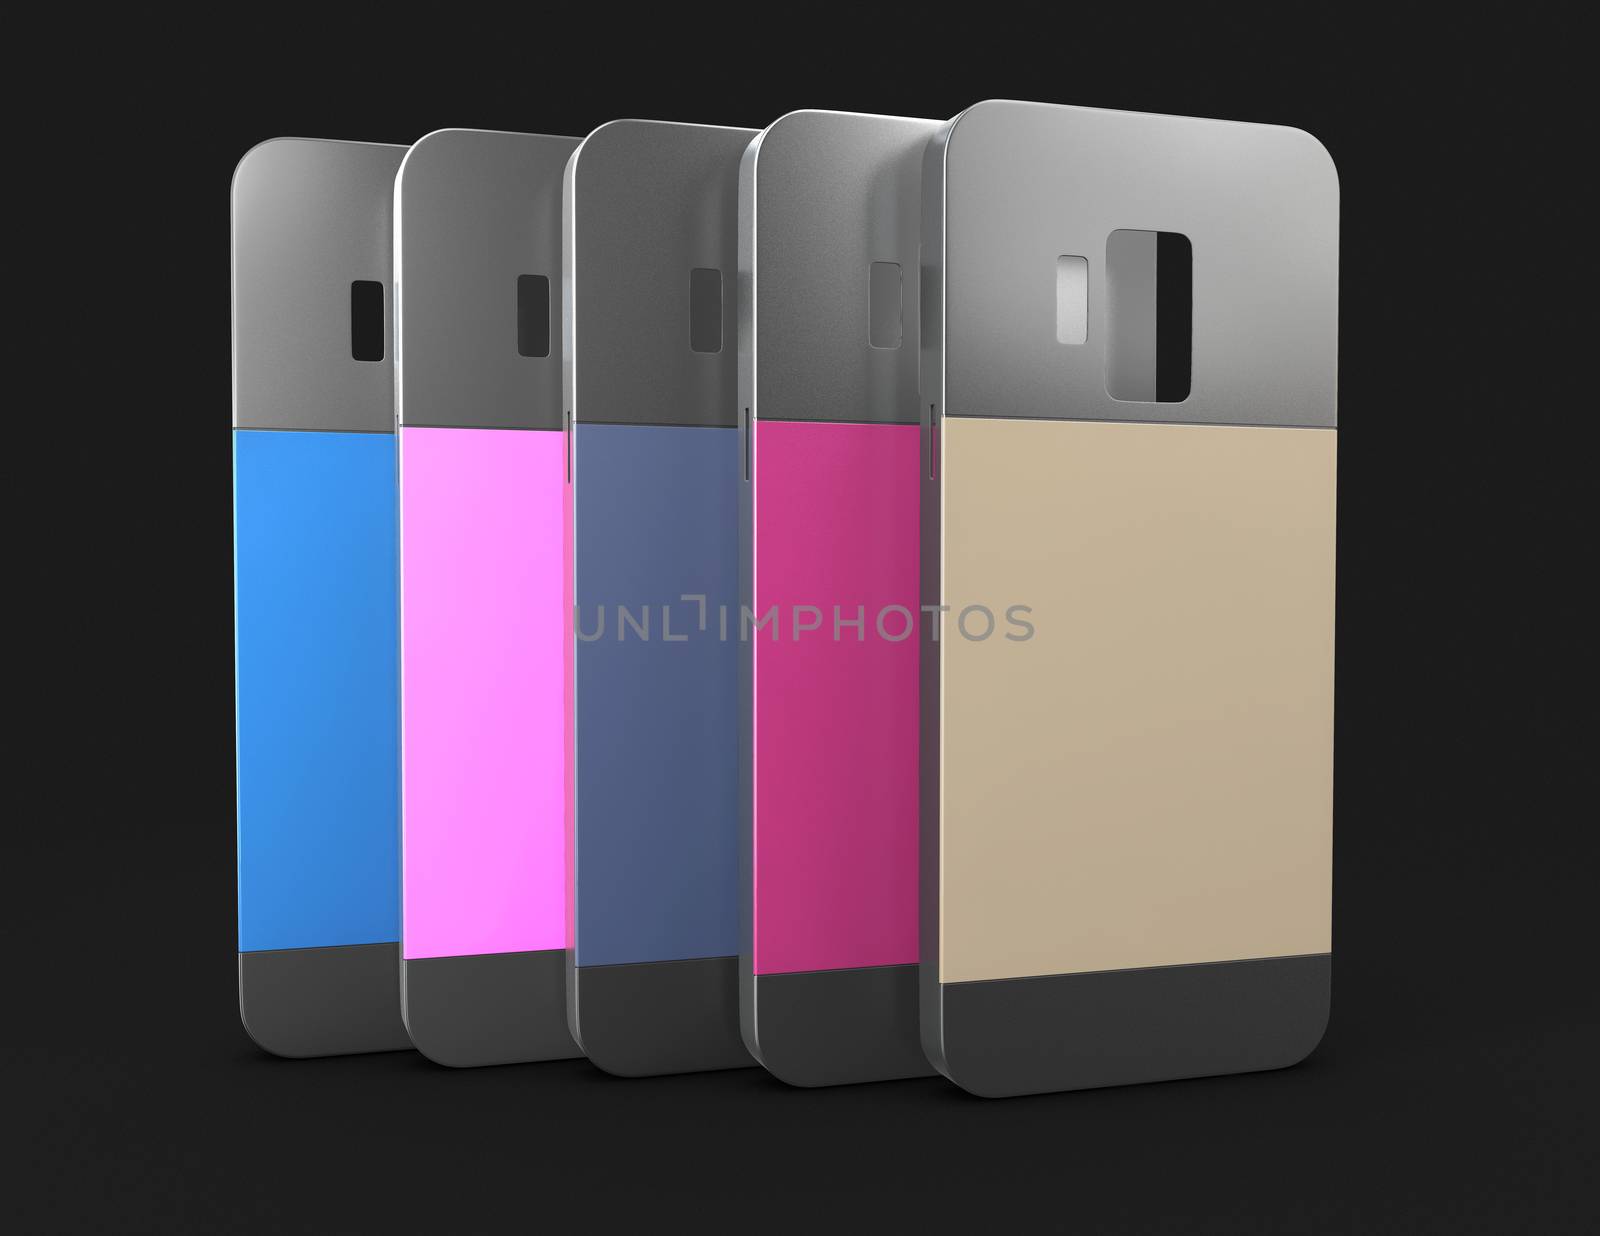 3d Illustration of smartphone back covers on a black background by tussik